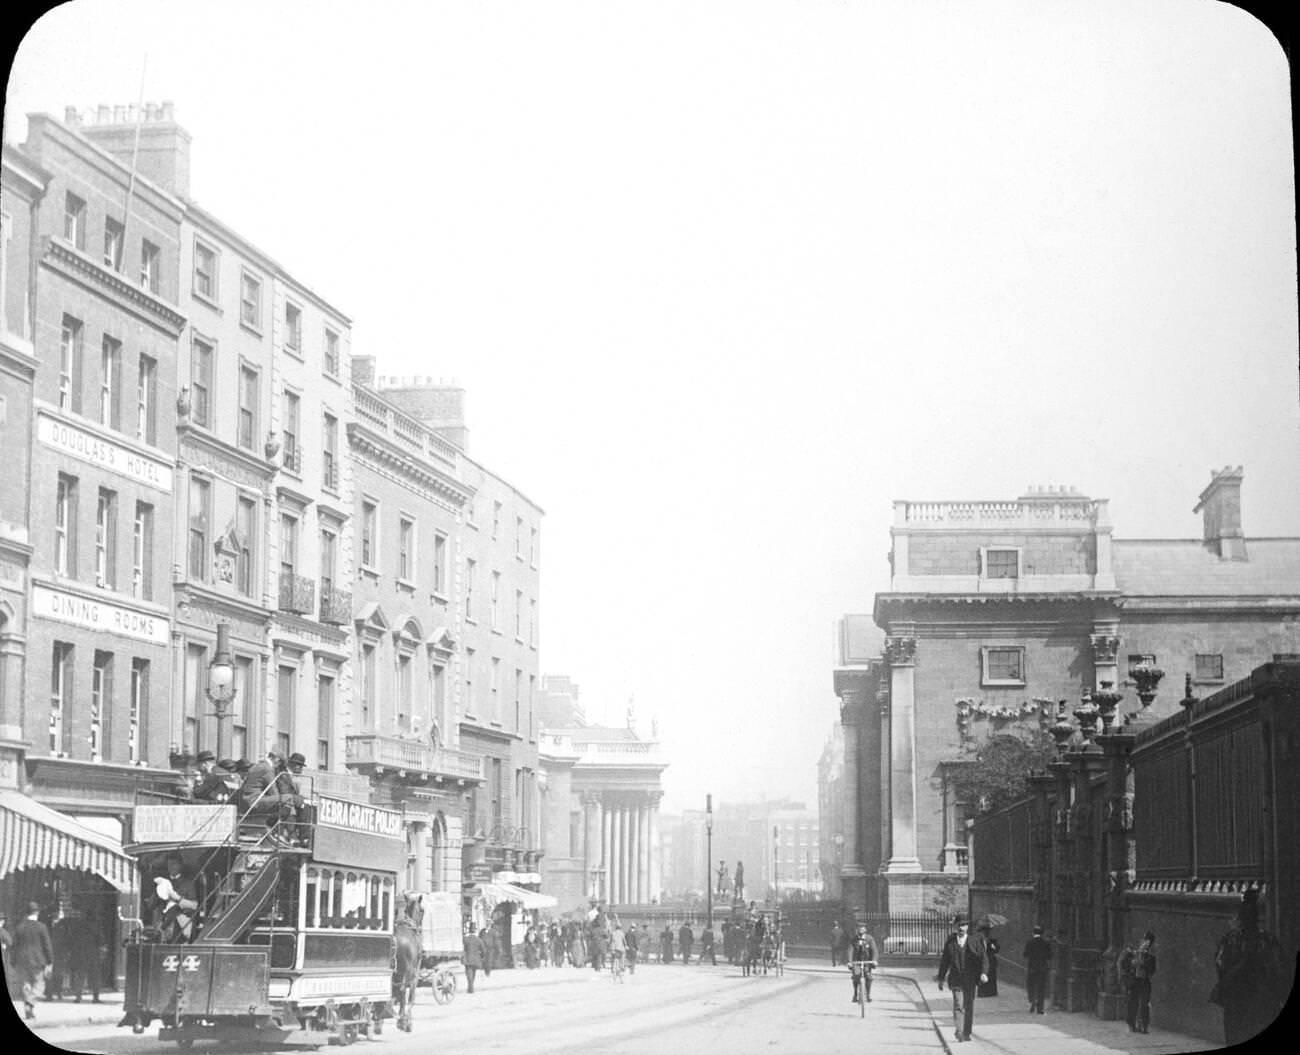 View looking down Grafton Street in Dublin during Victorian times. The Douglas's Hotel and Dining Rooms are visible on the left, and the number 44 horse drawn tram shows adverts for Zebra Grate Polish.